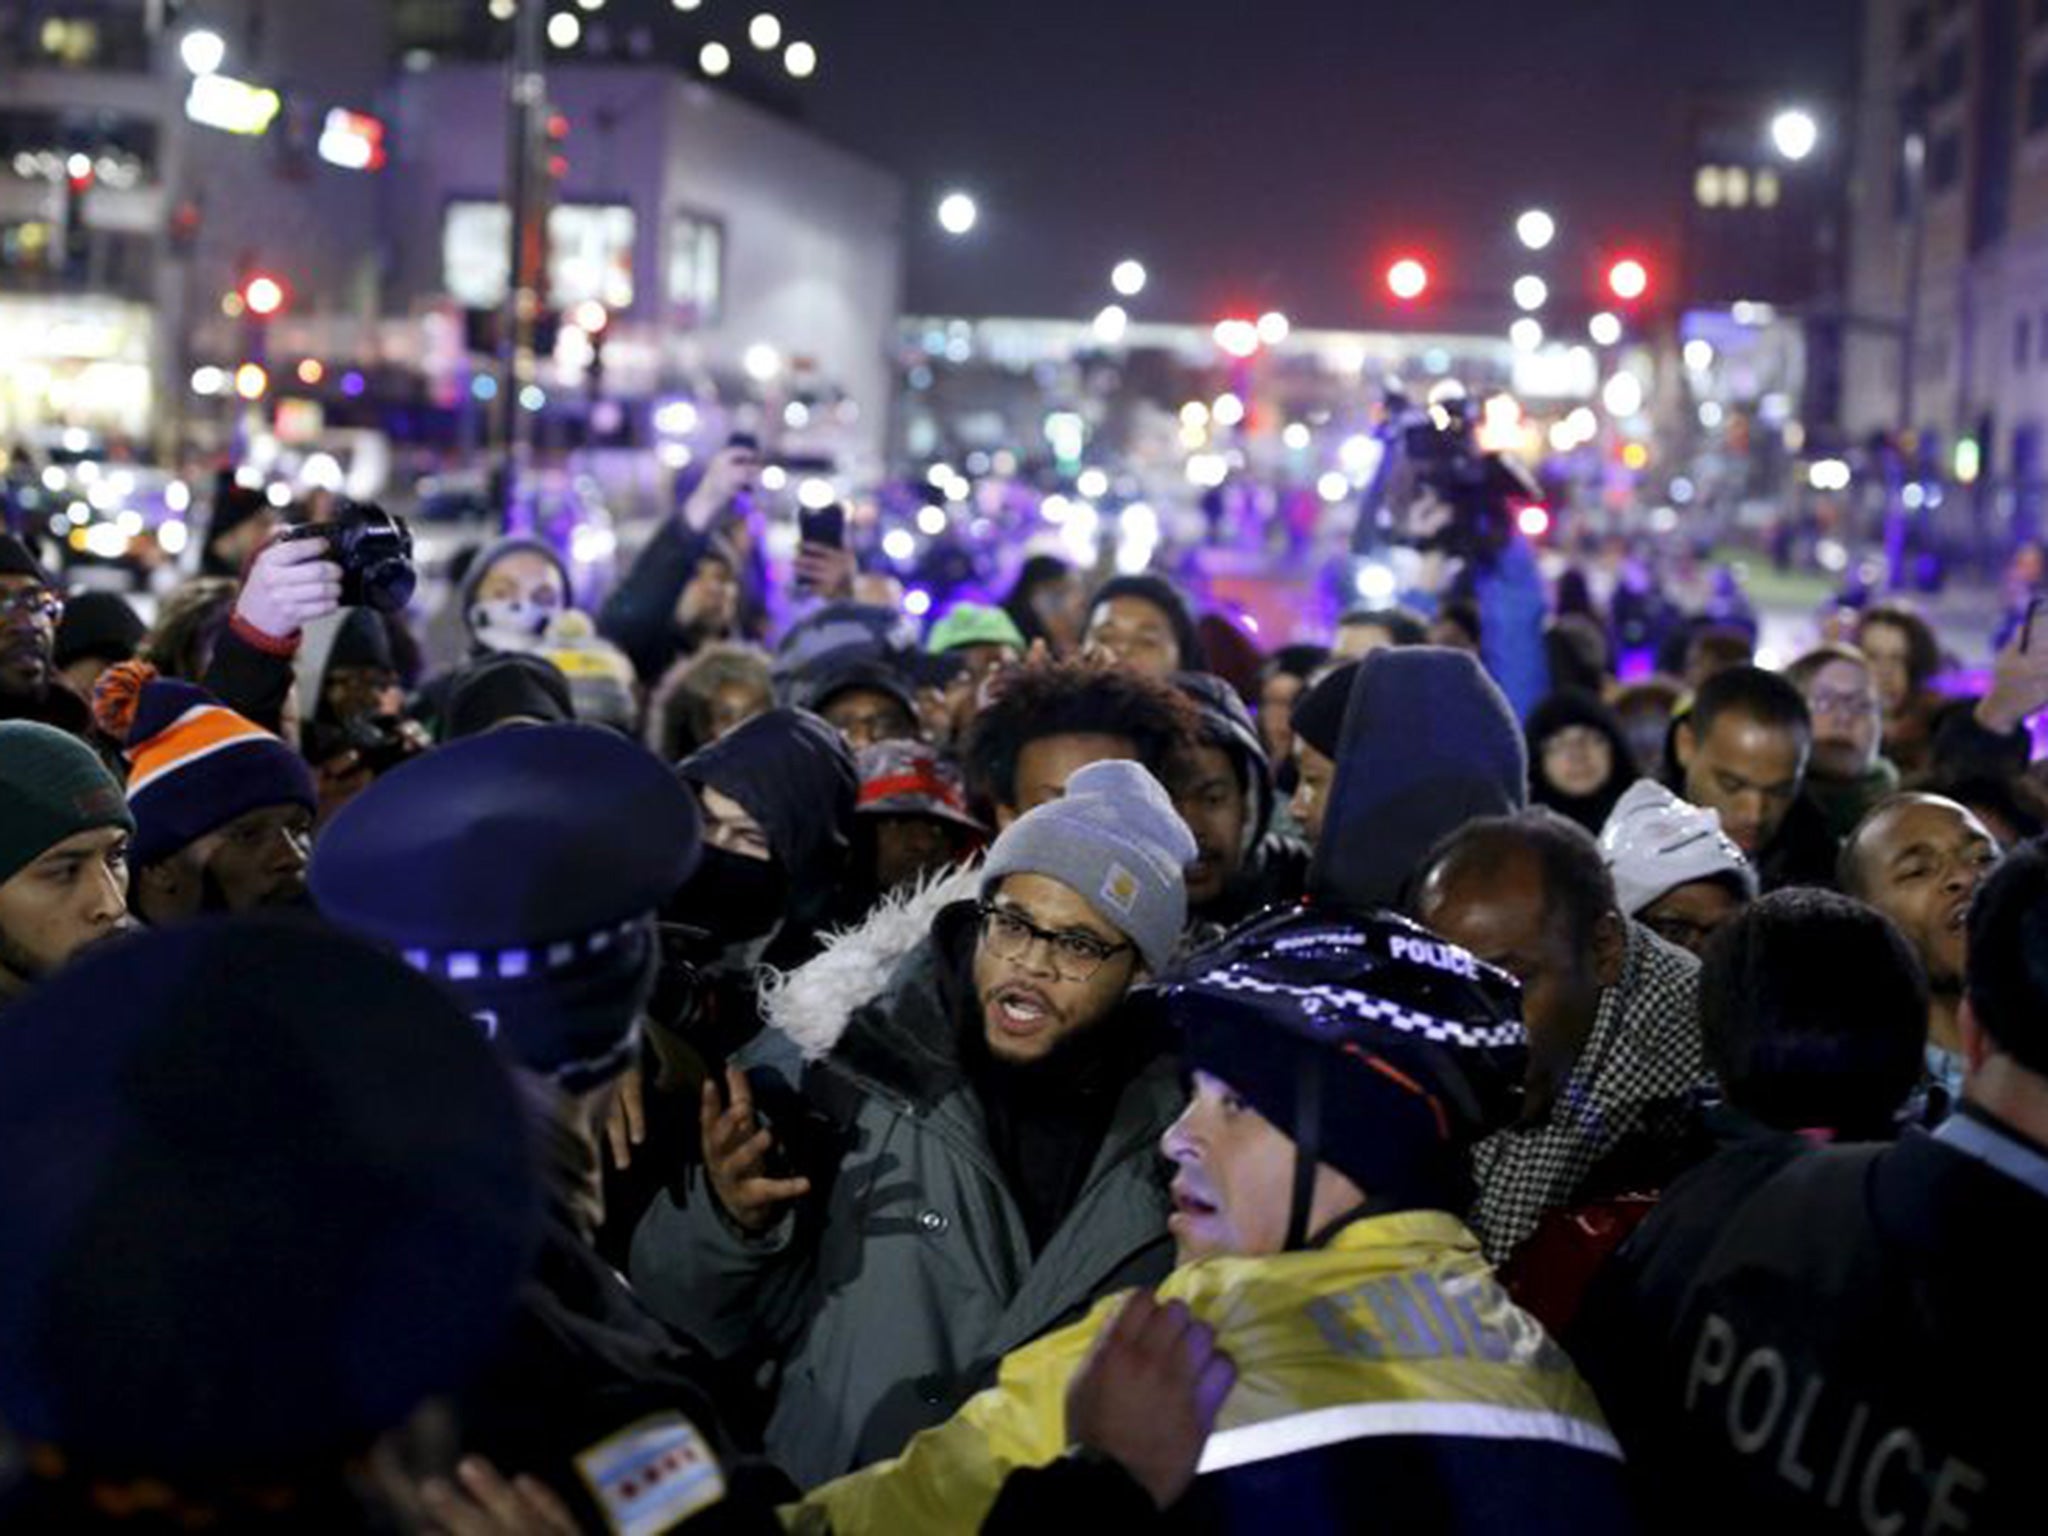 Allegations of police brutality and discrimination have drawn thousands of protestors to the streets in Chicago in recent months.